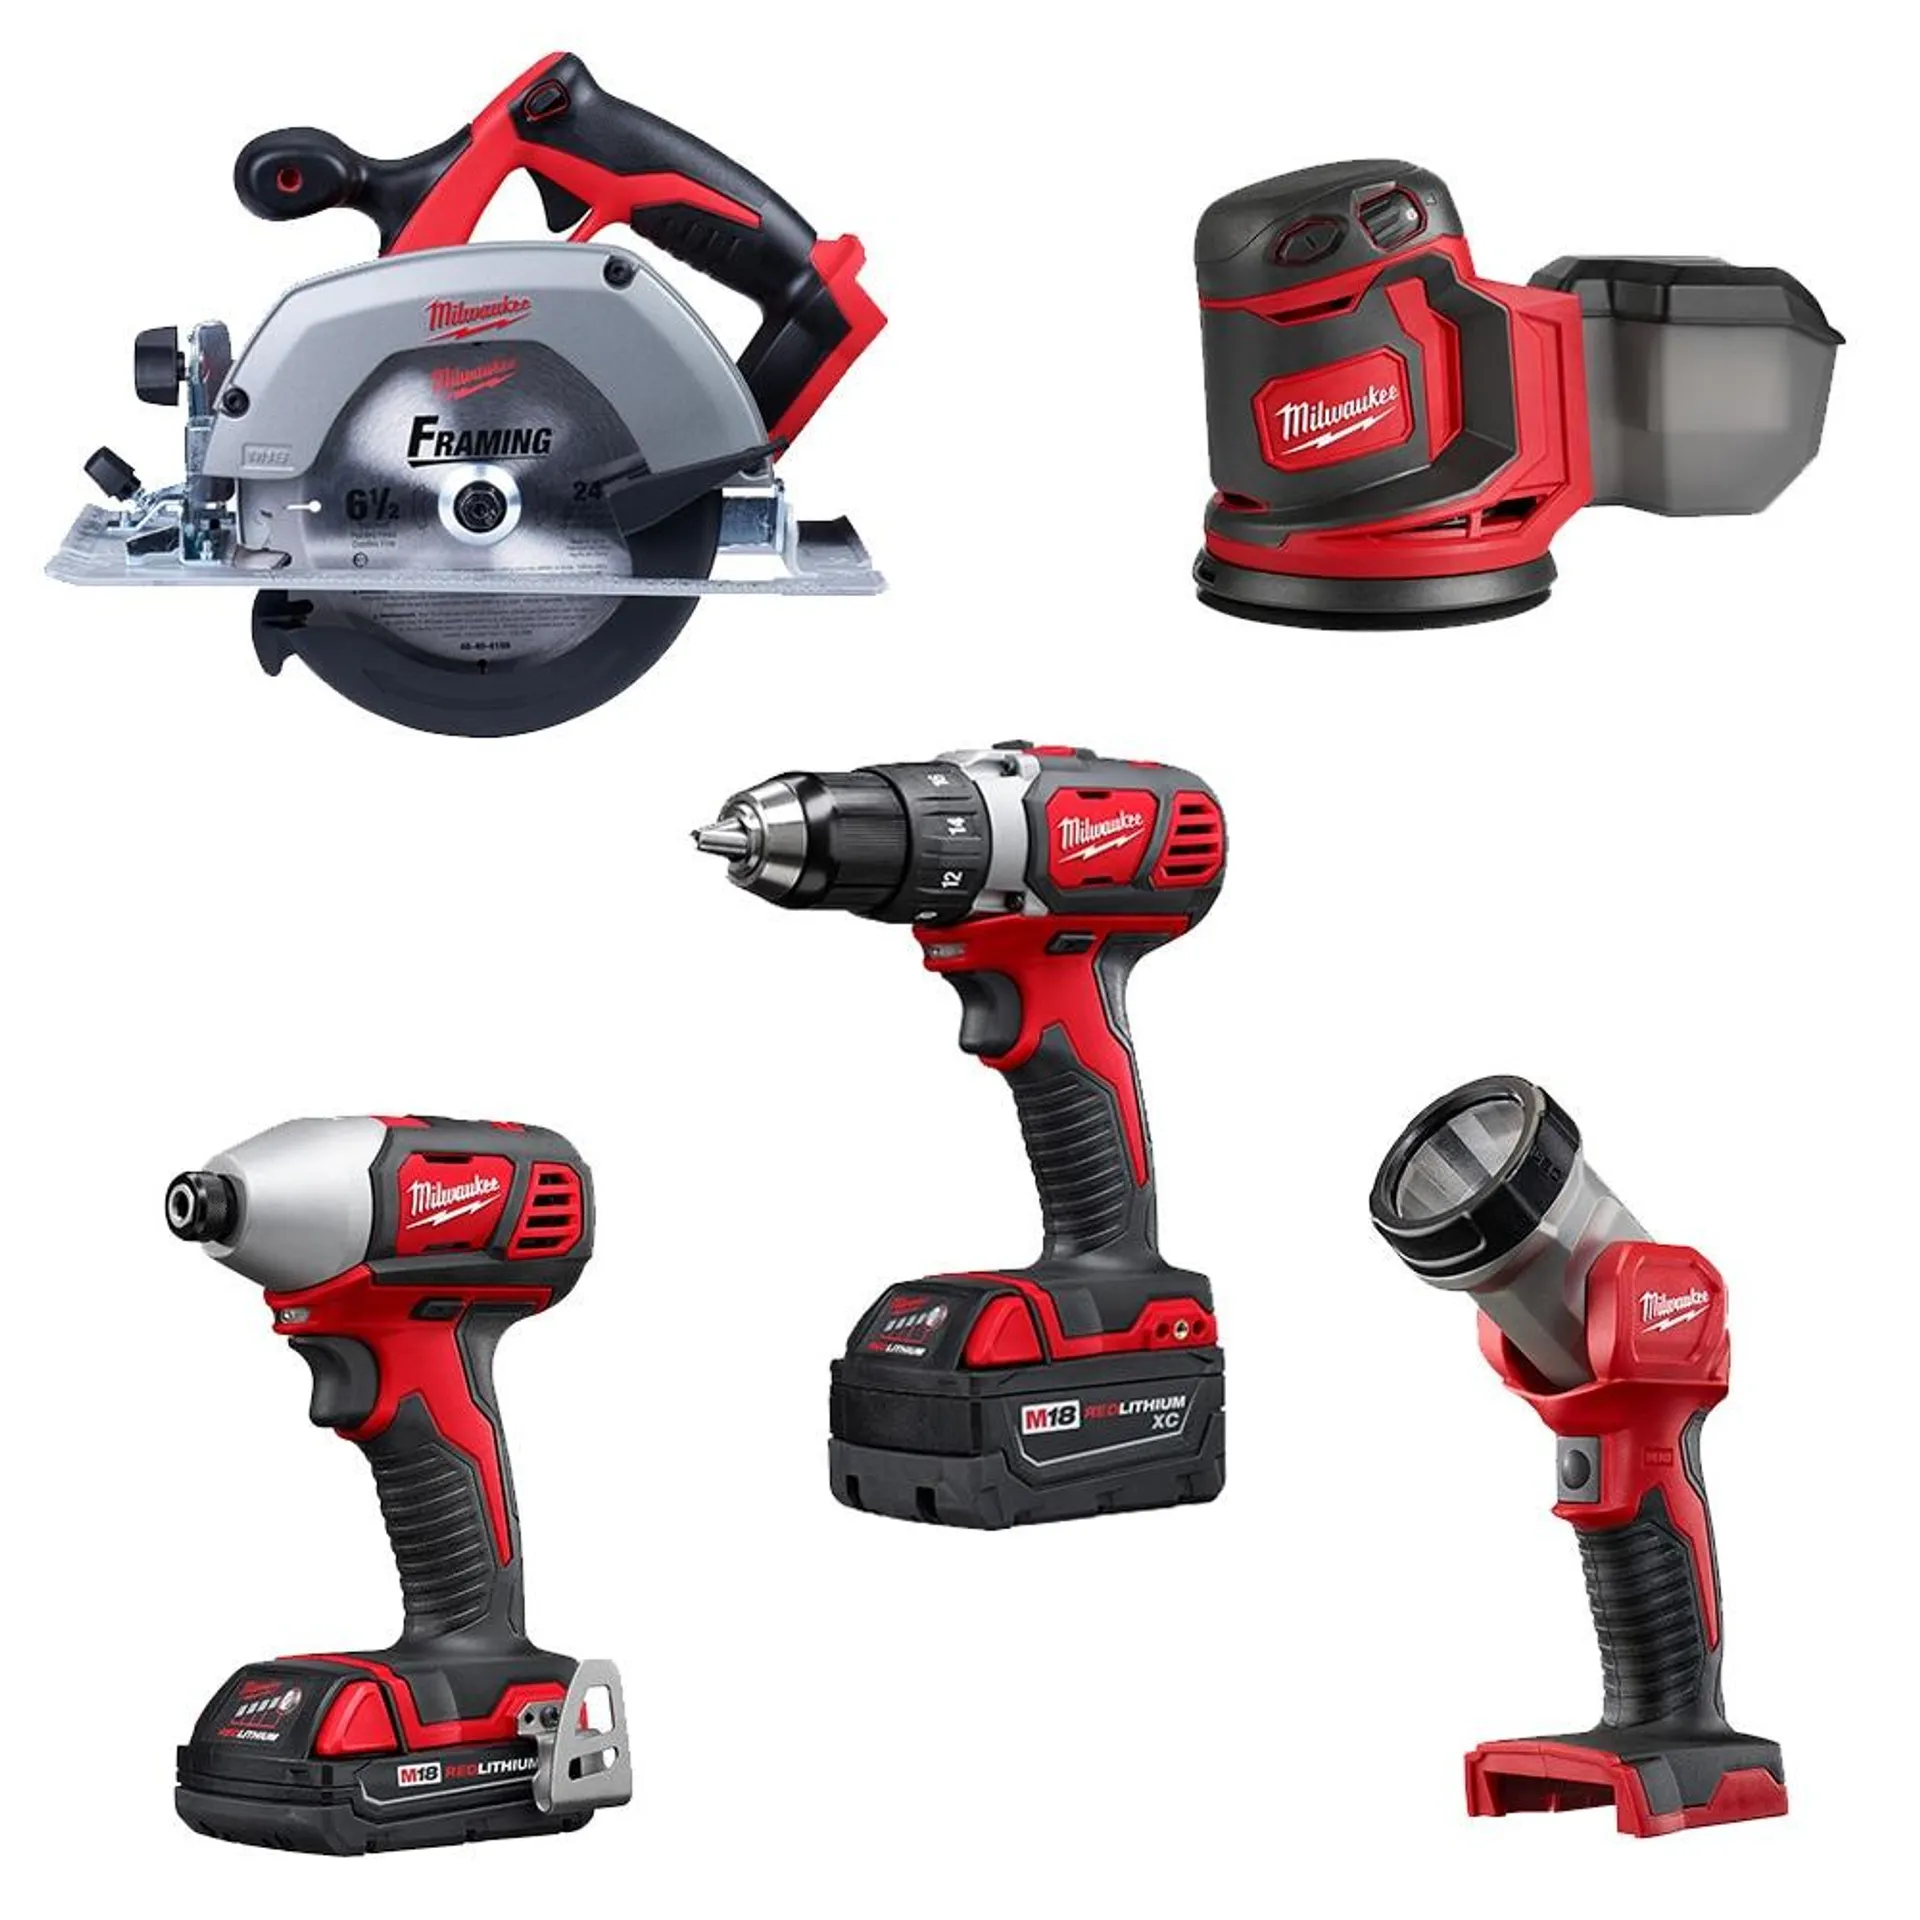 M18 18V Lithium-Ion Cordless Combo Kit (5-Tool) with 2-Batteries, Charger and Tool Bag